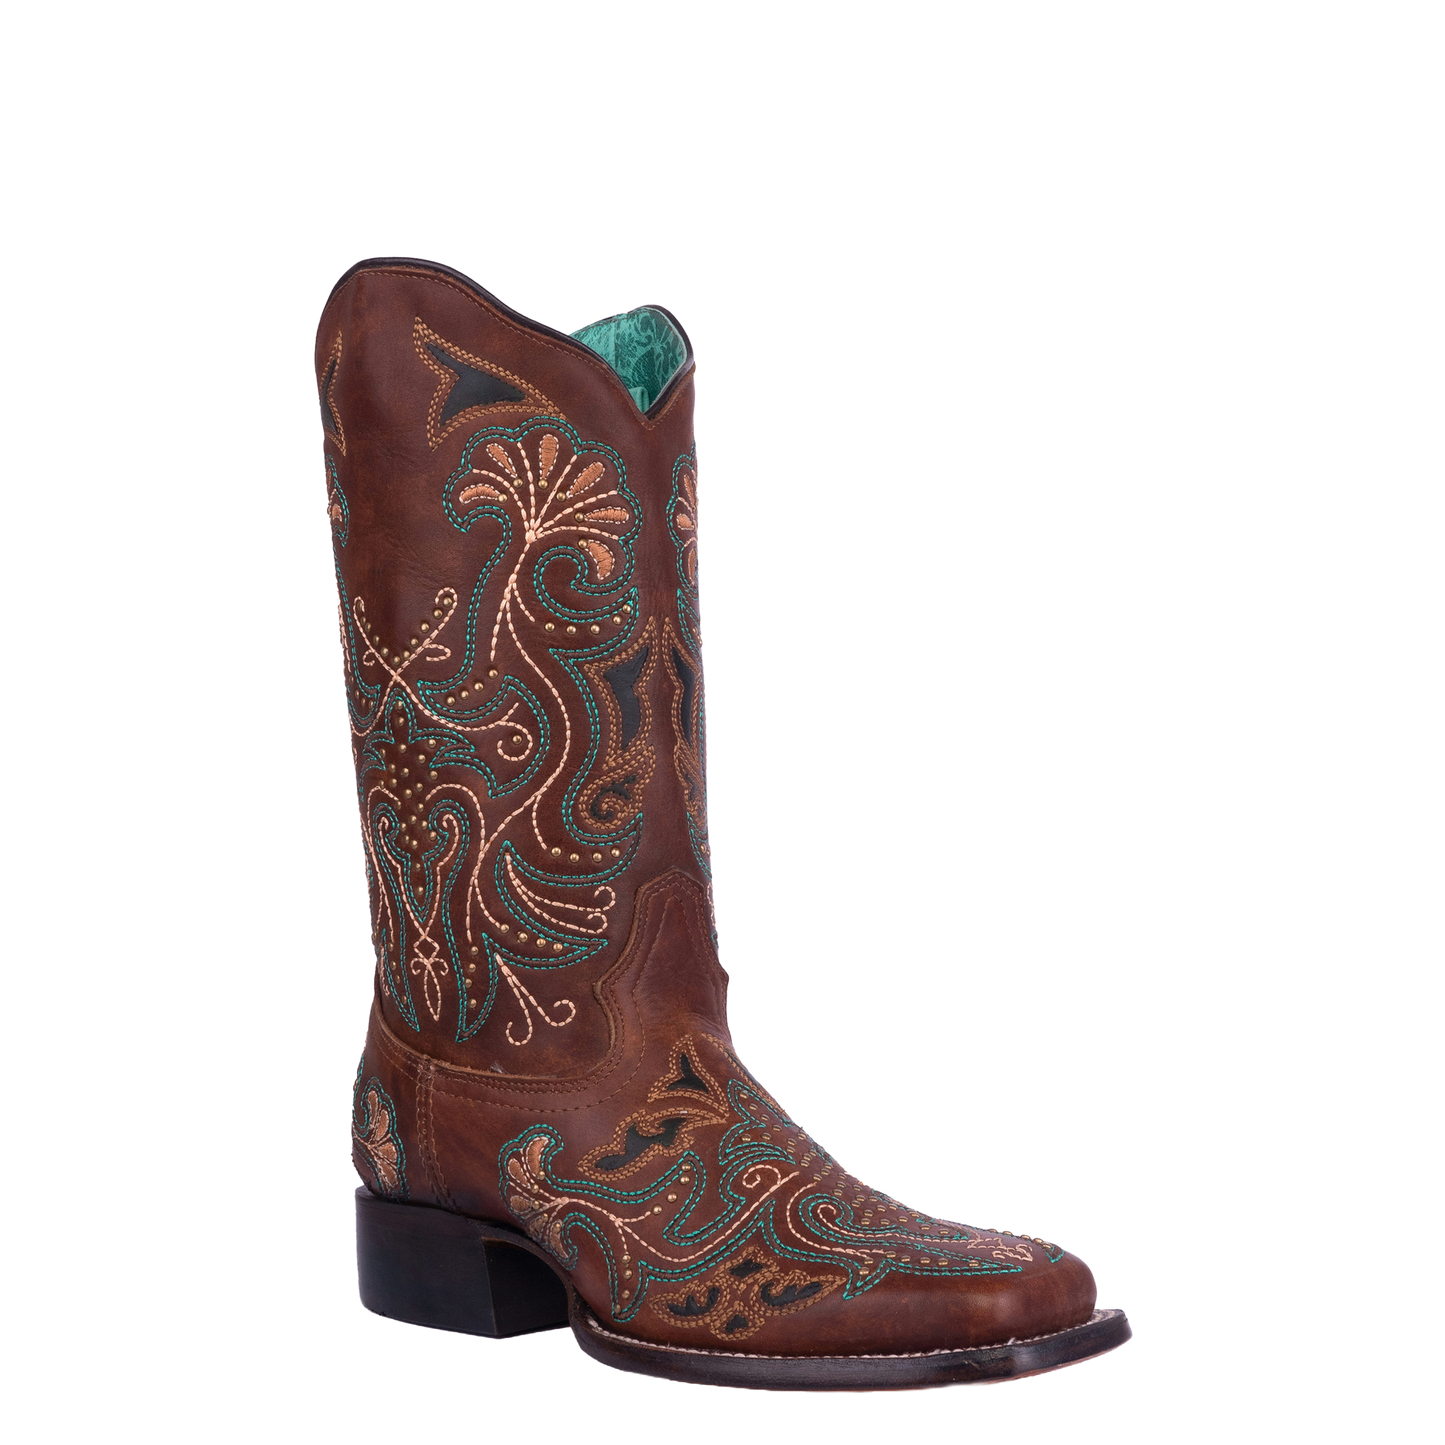 Corral Ladies Tan Embroidery & Studs Wide Square Toe Boots A4485